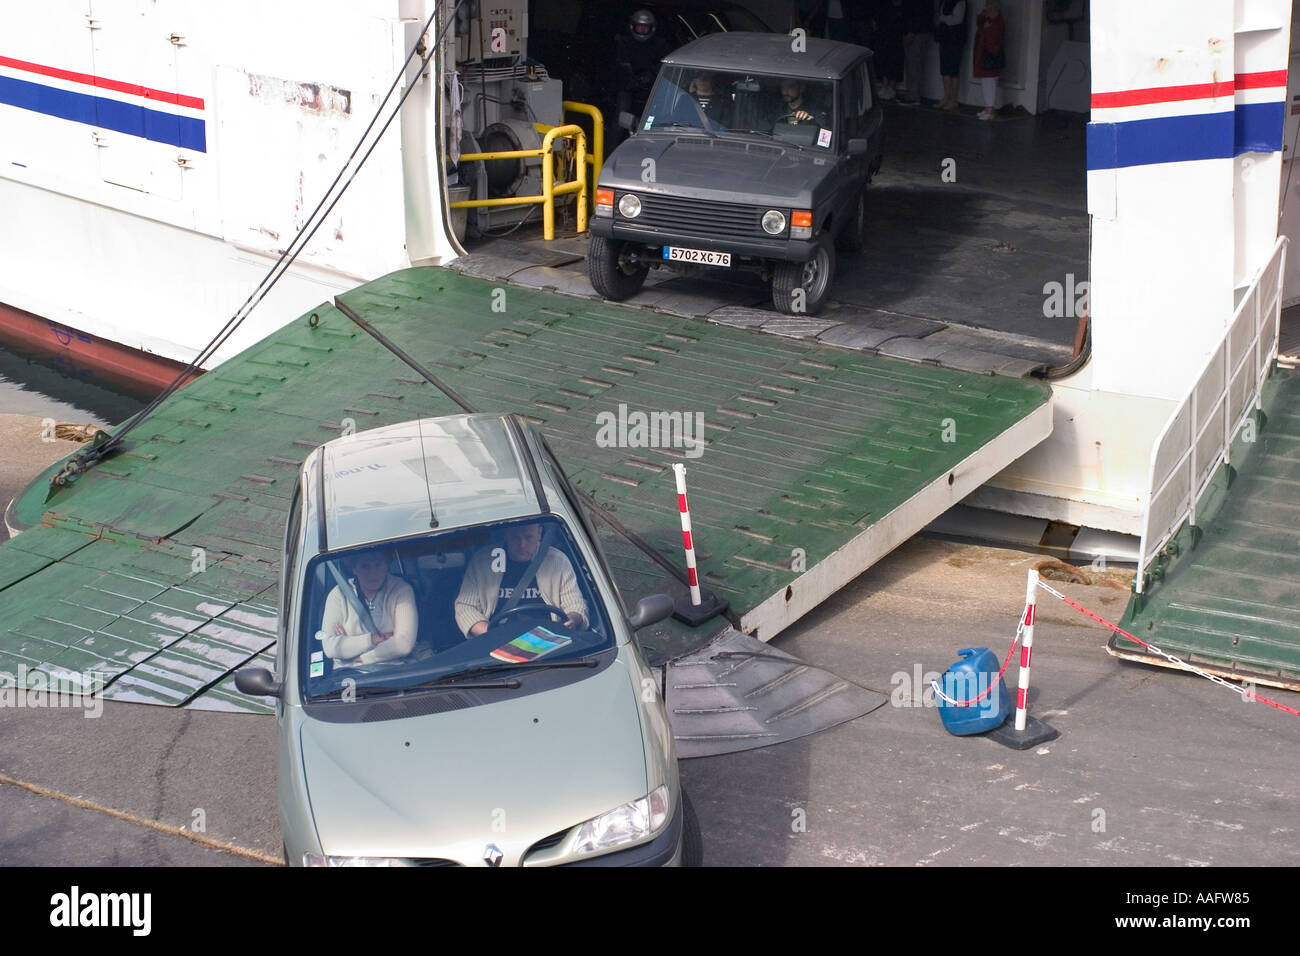 Cars leaving a car ferry france Stock Photo